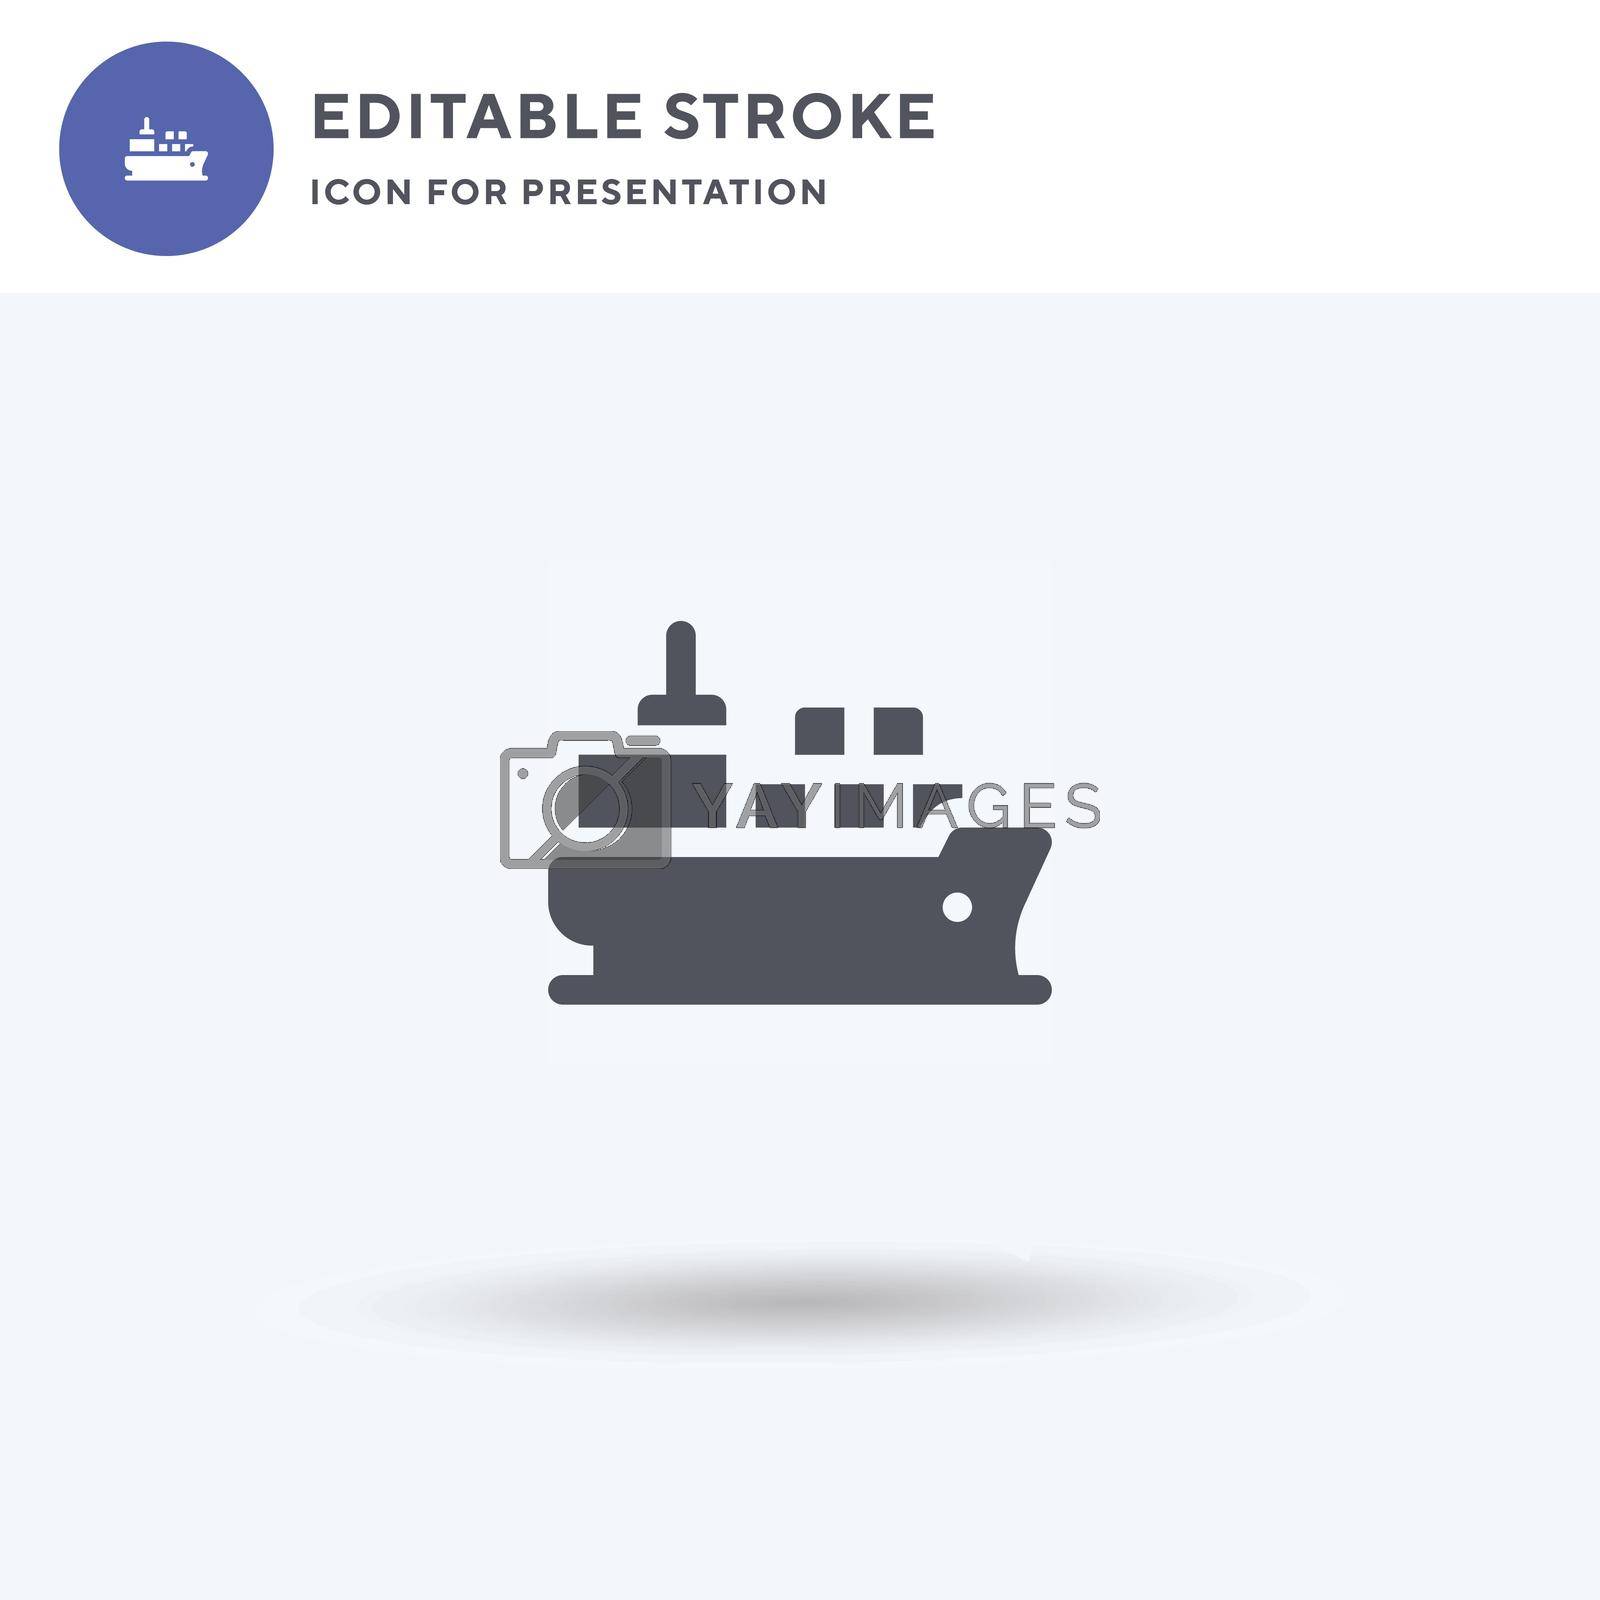 Cargo Ship icon vector, filled flat sign, solid pictogram isolated on white, logo illustration. Cargo Ship icon for presentation.